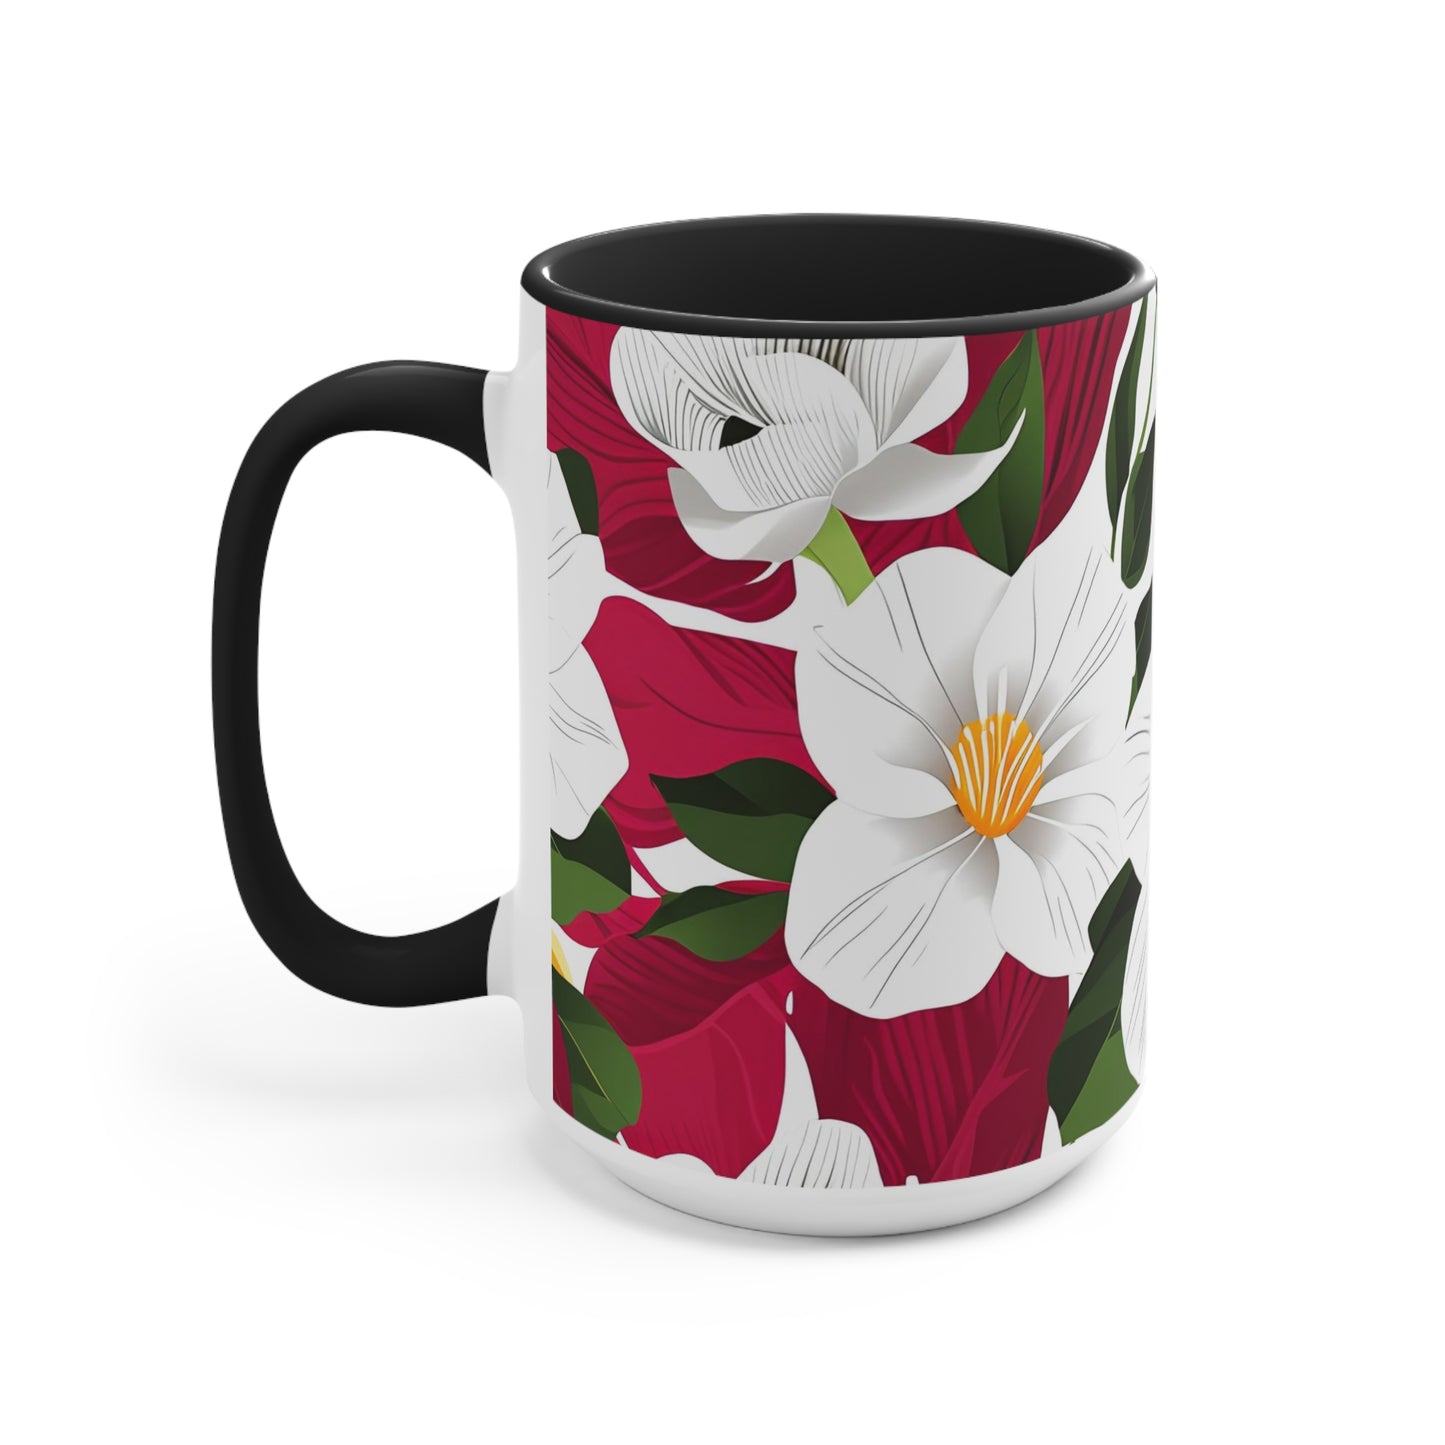 White Flowers on Red, Ceramic Mug - Perfect for Coffee, Tea, and More!